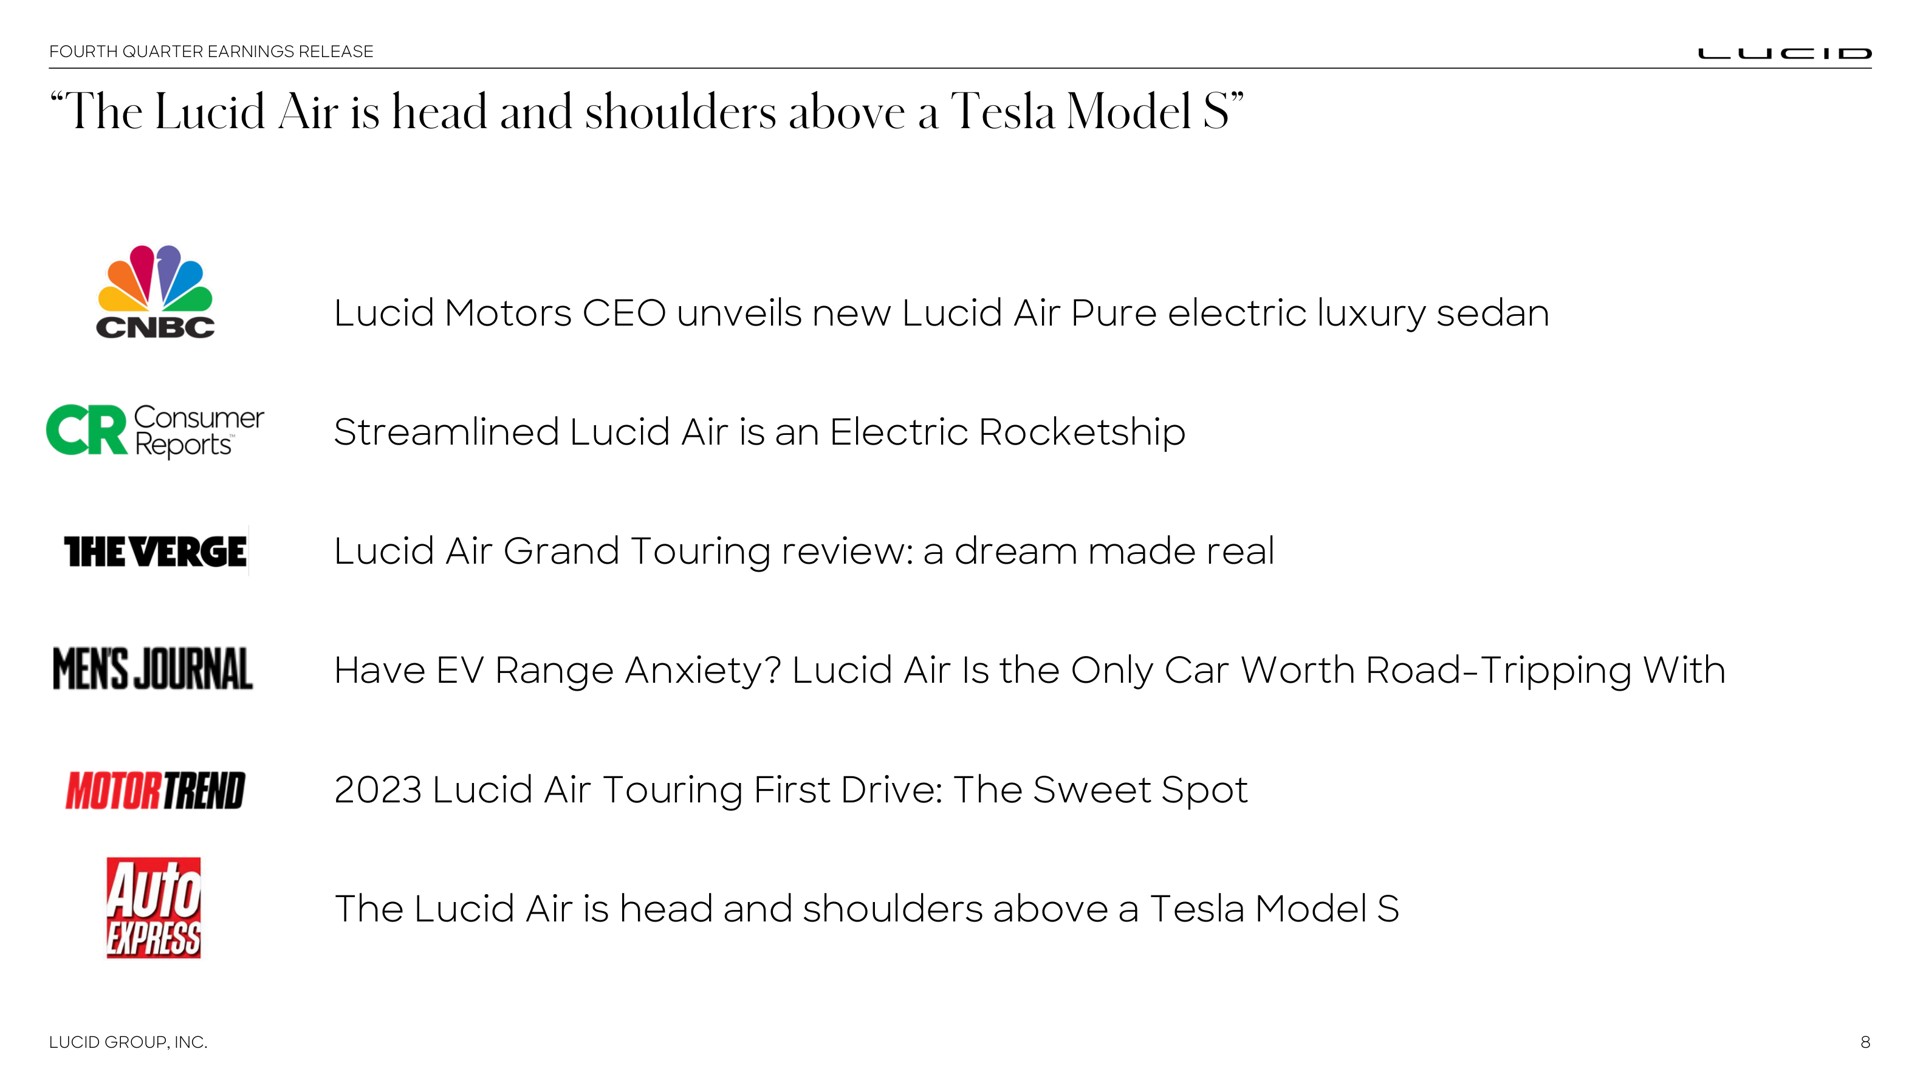 the lucid air is head and shoulders above a model lucid motors unveils new lucid air pure electric luxury sedan streamlined lucid air is an electric lucid air grand touring review a dream made real have range anxiety lucid air is the only car worth road tripping with lucid air touring first drive the sweet spot the lucid air is head and shoulders above a model roots verge mens journal | Lucid Motors